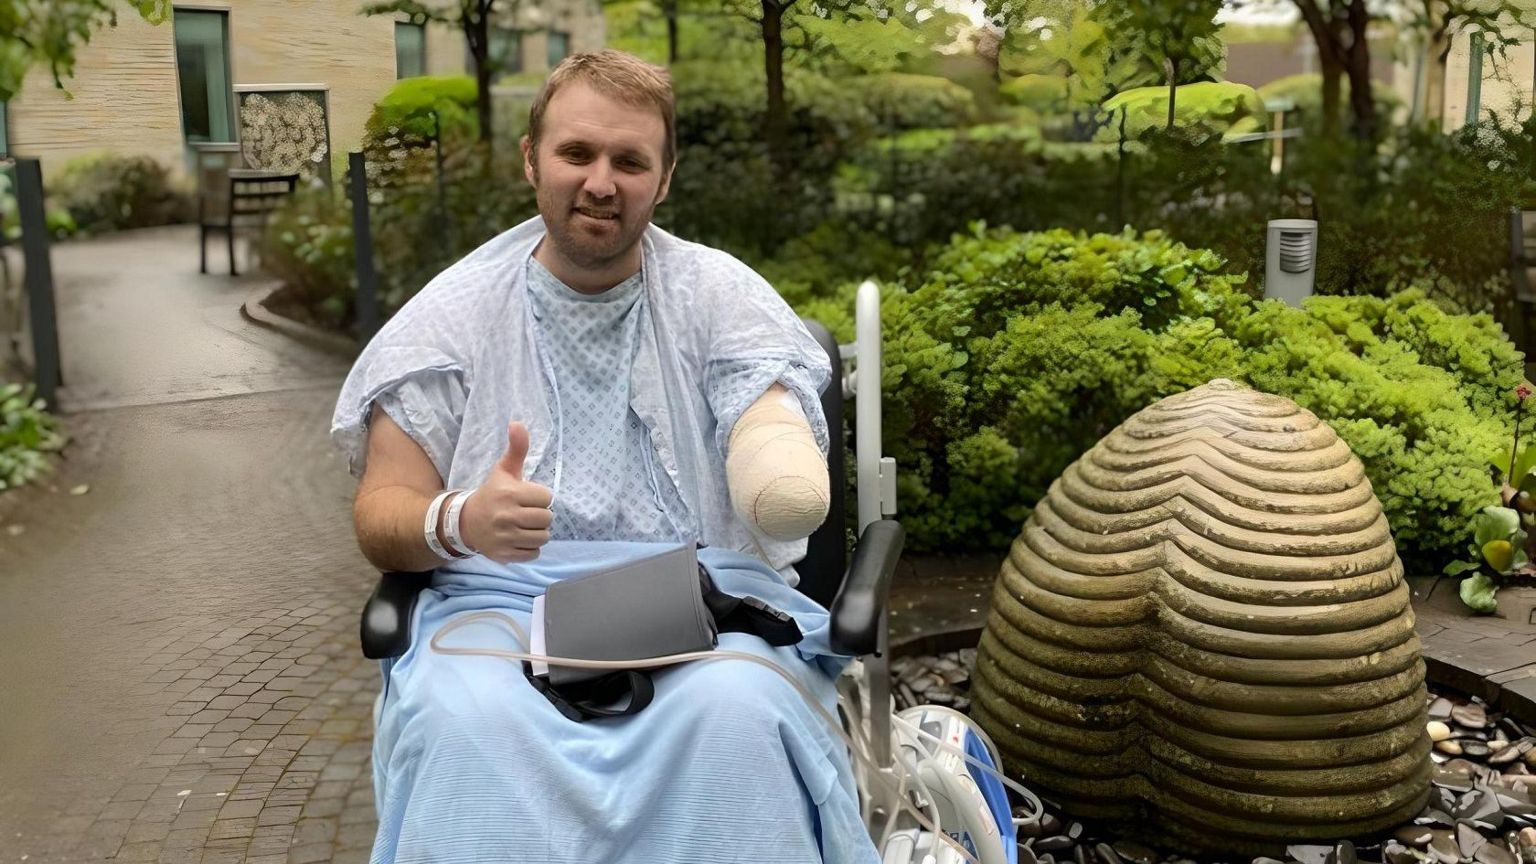 John is pictured outside in a wheelchair, wearing a hospital gown with a blue blanket over his legs. He is smiling at the camera and giving a thumbs up. 